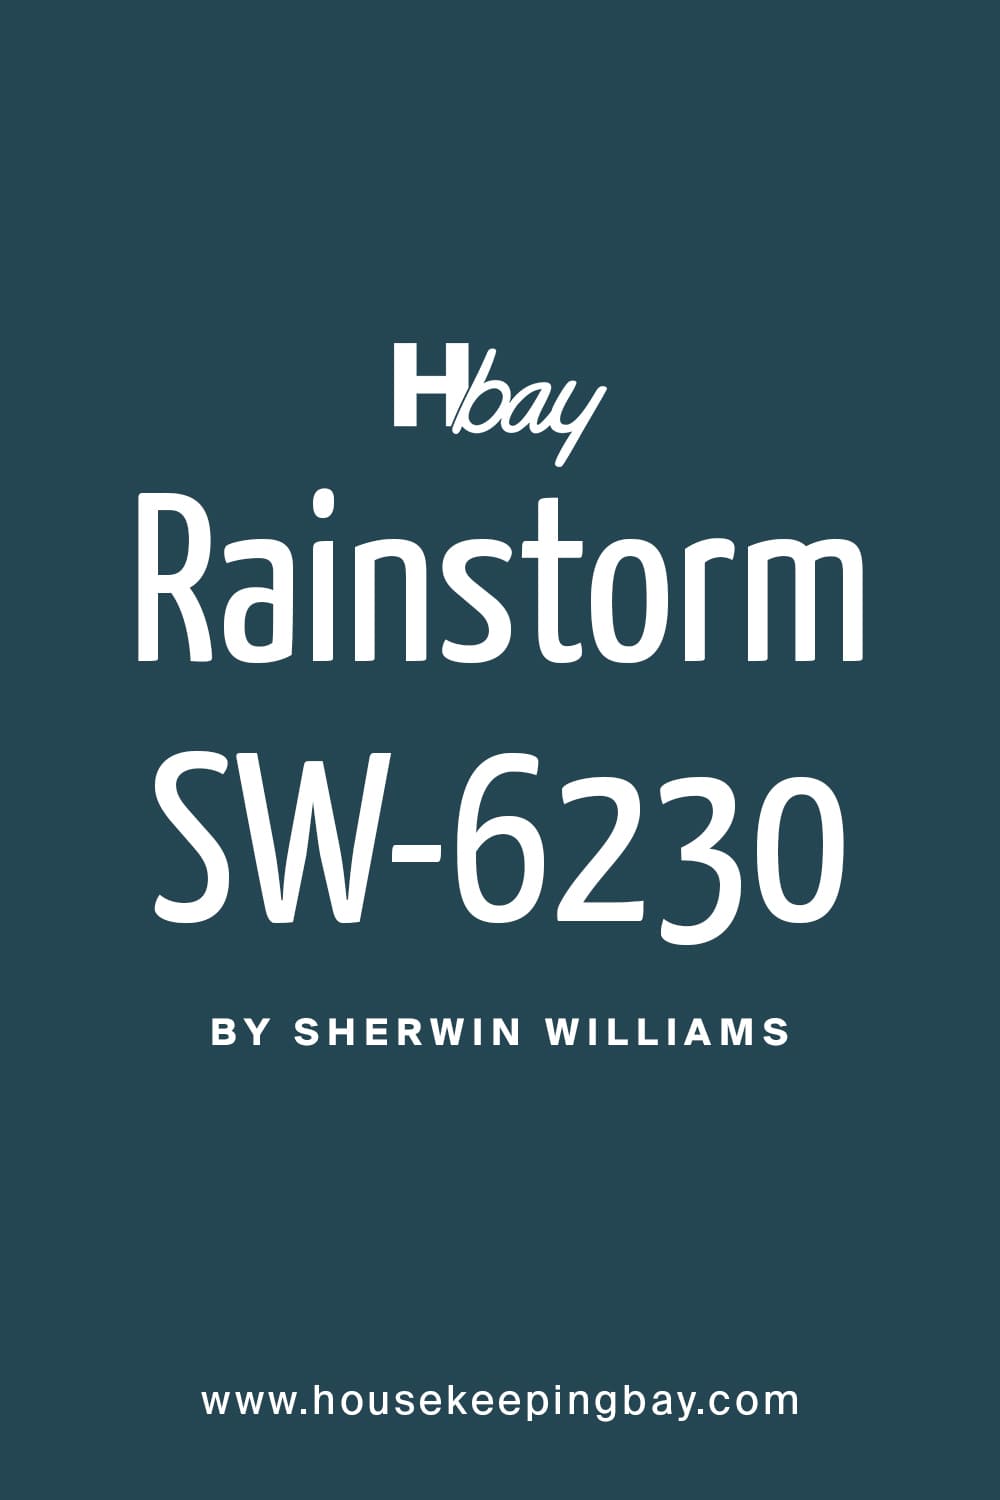 Rainstorm SW-6230 Paint Color by Sherwin Williams